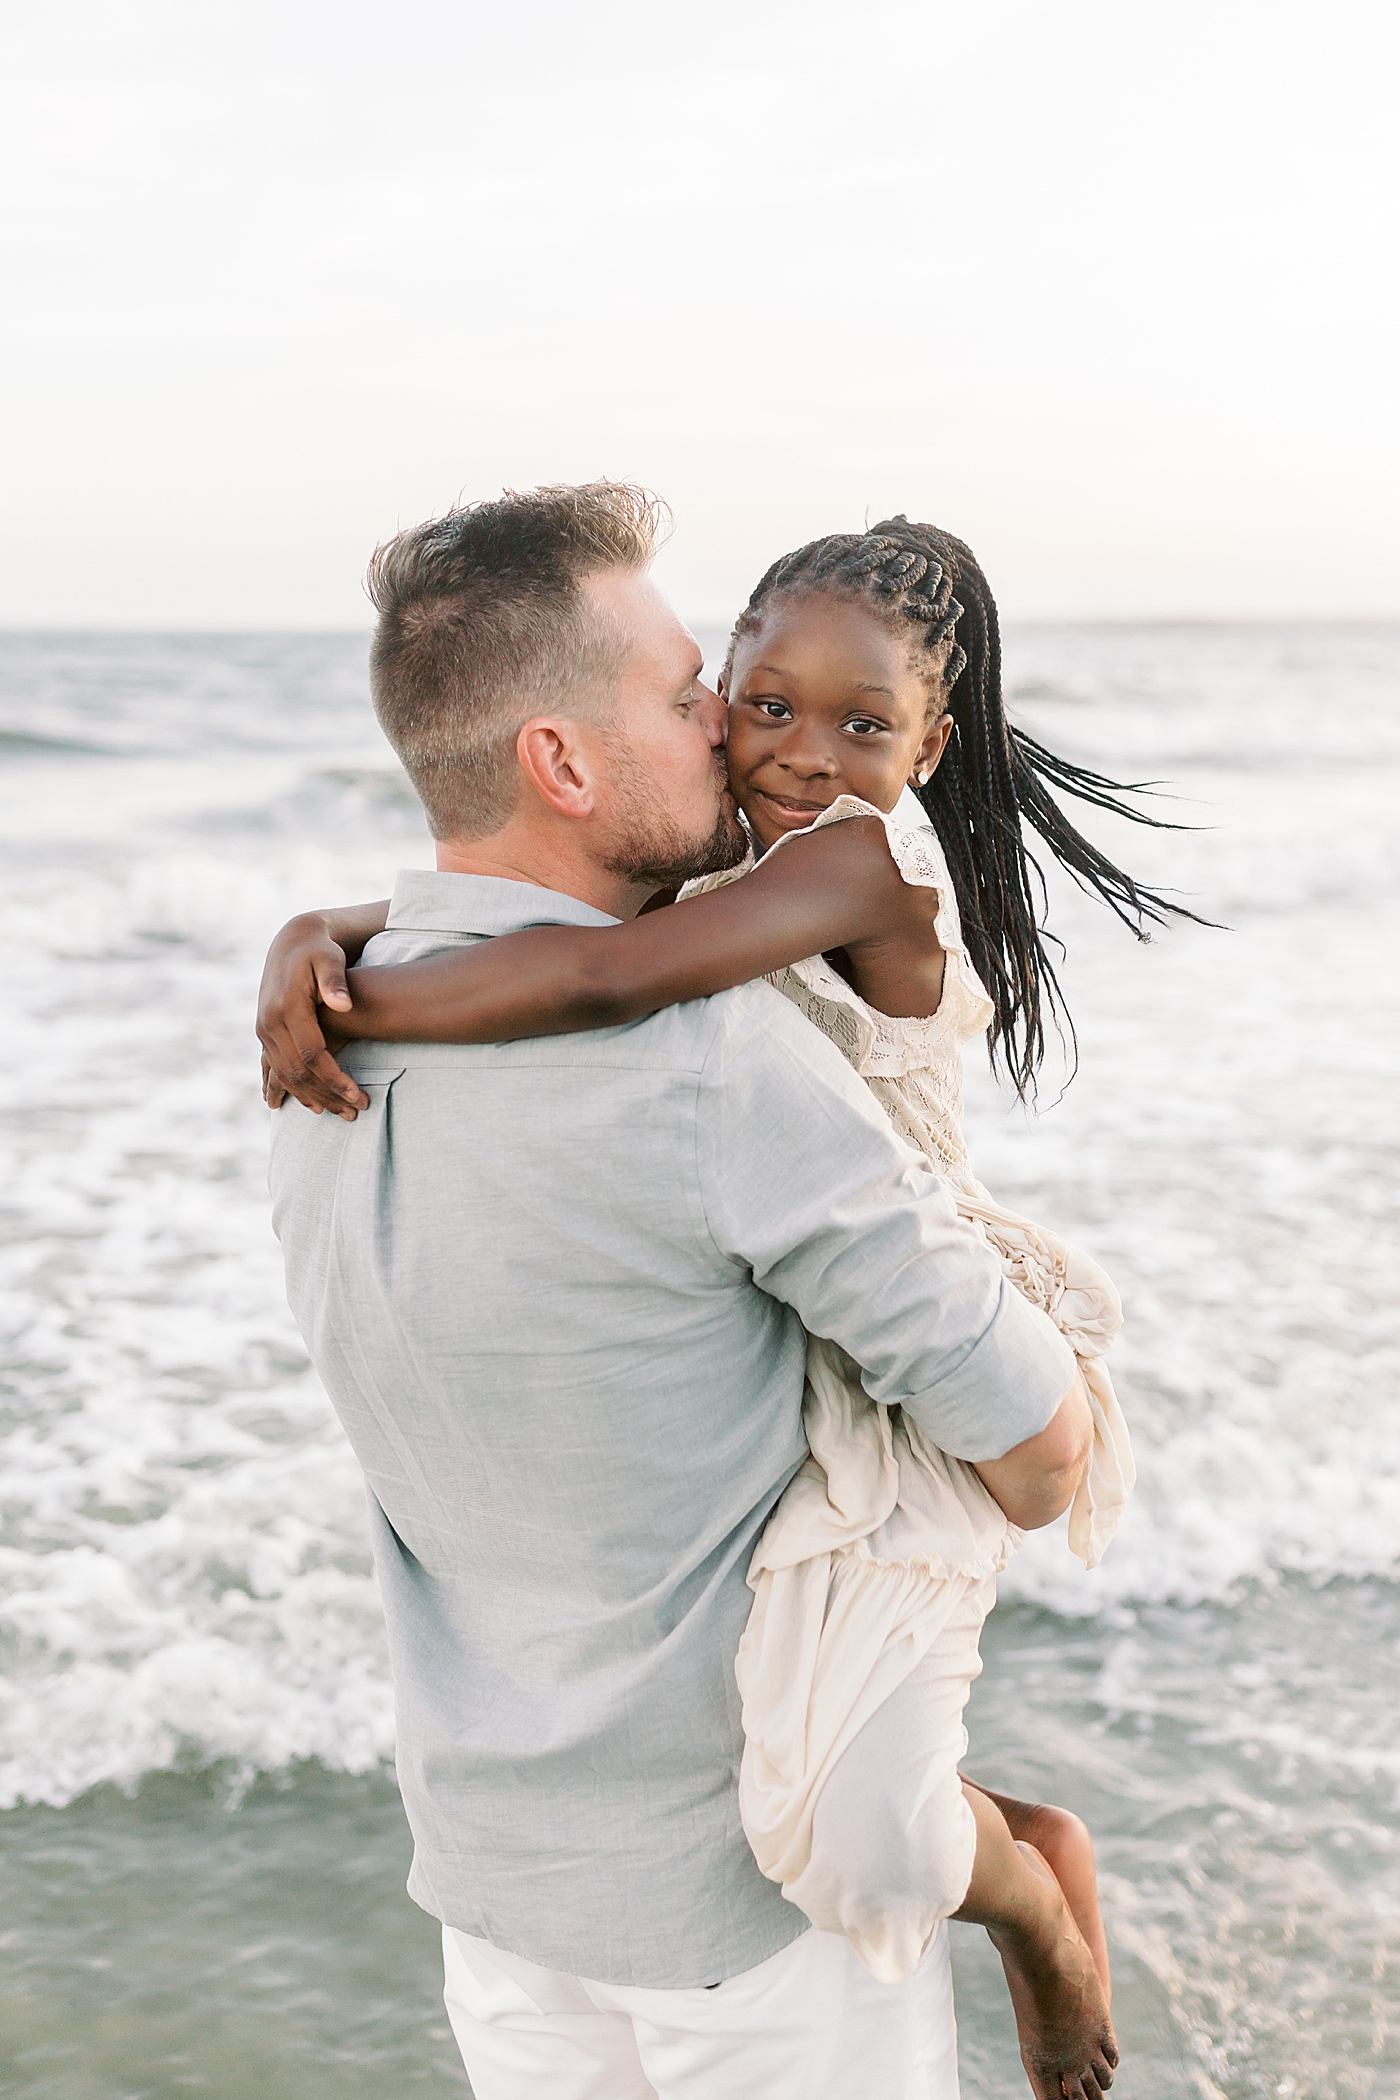 Dad snuggling with his daughter during beach family photos in Charleston | Image by Caitlyn Motycka